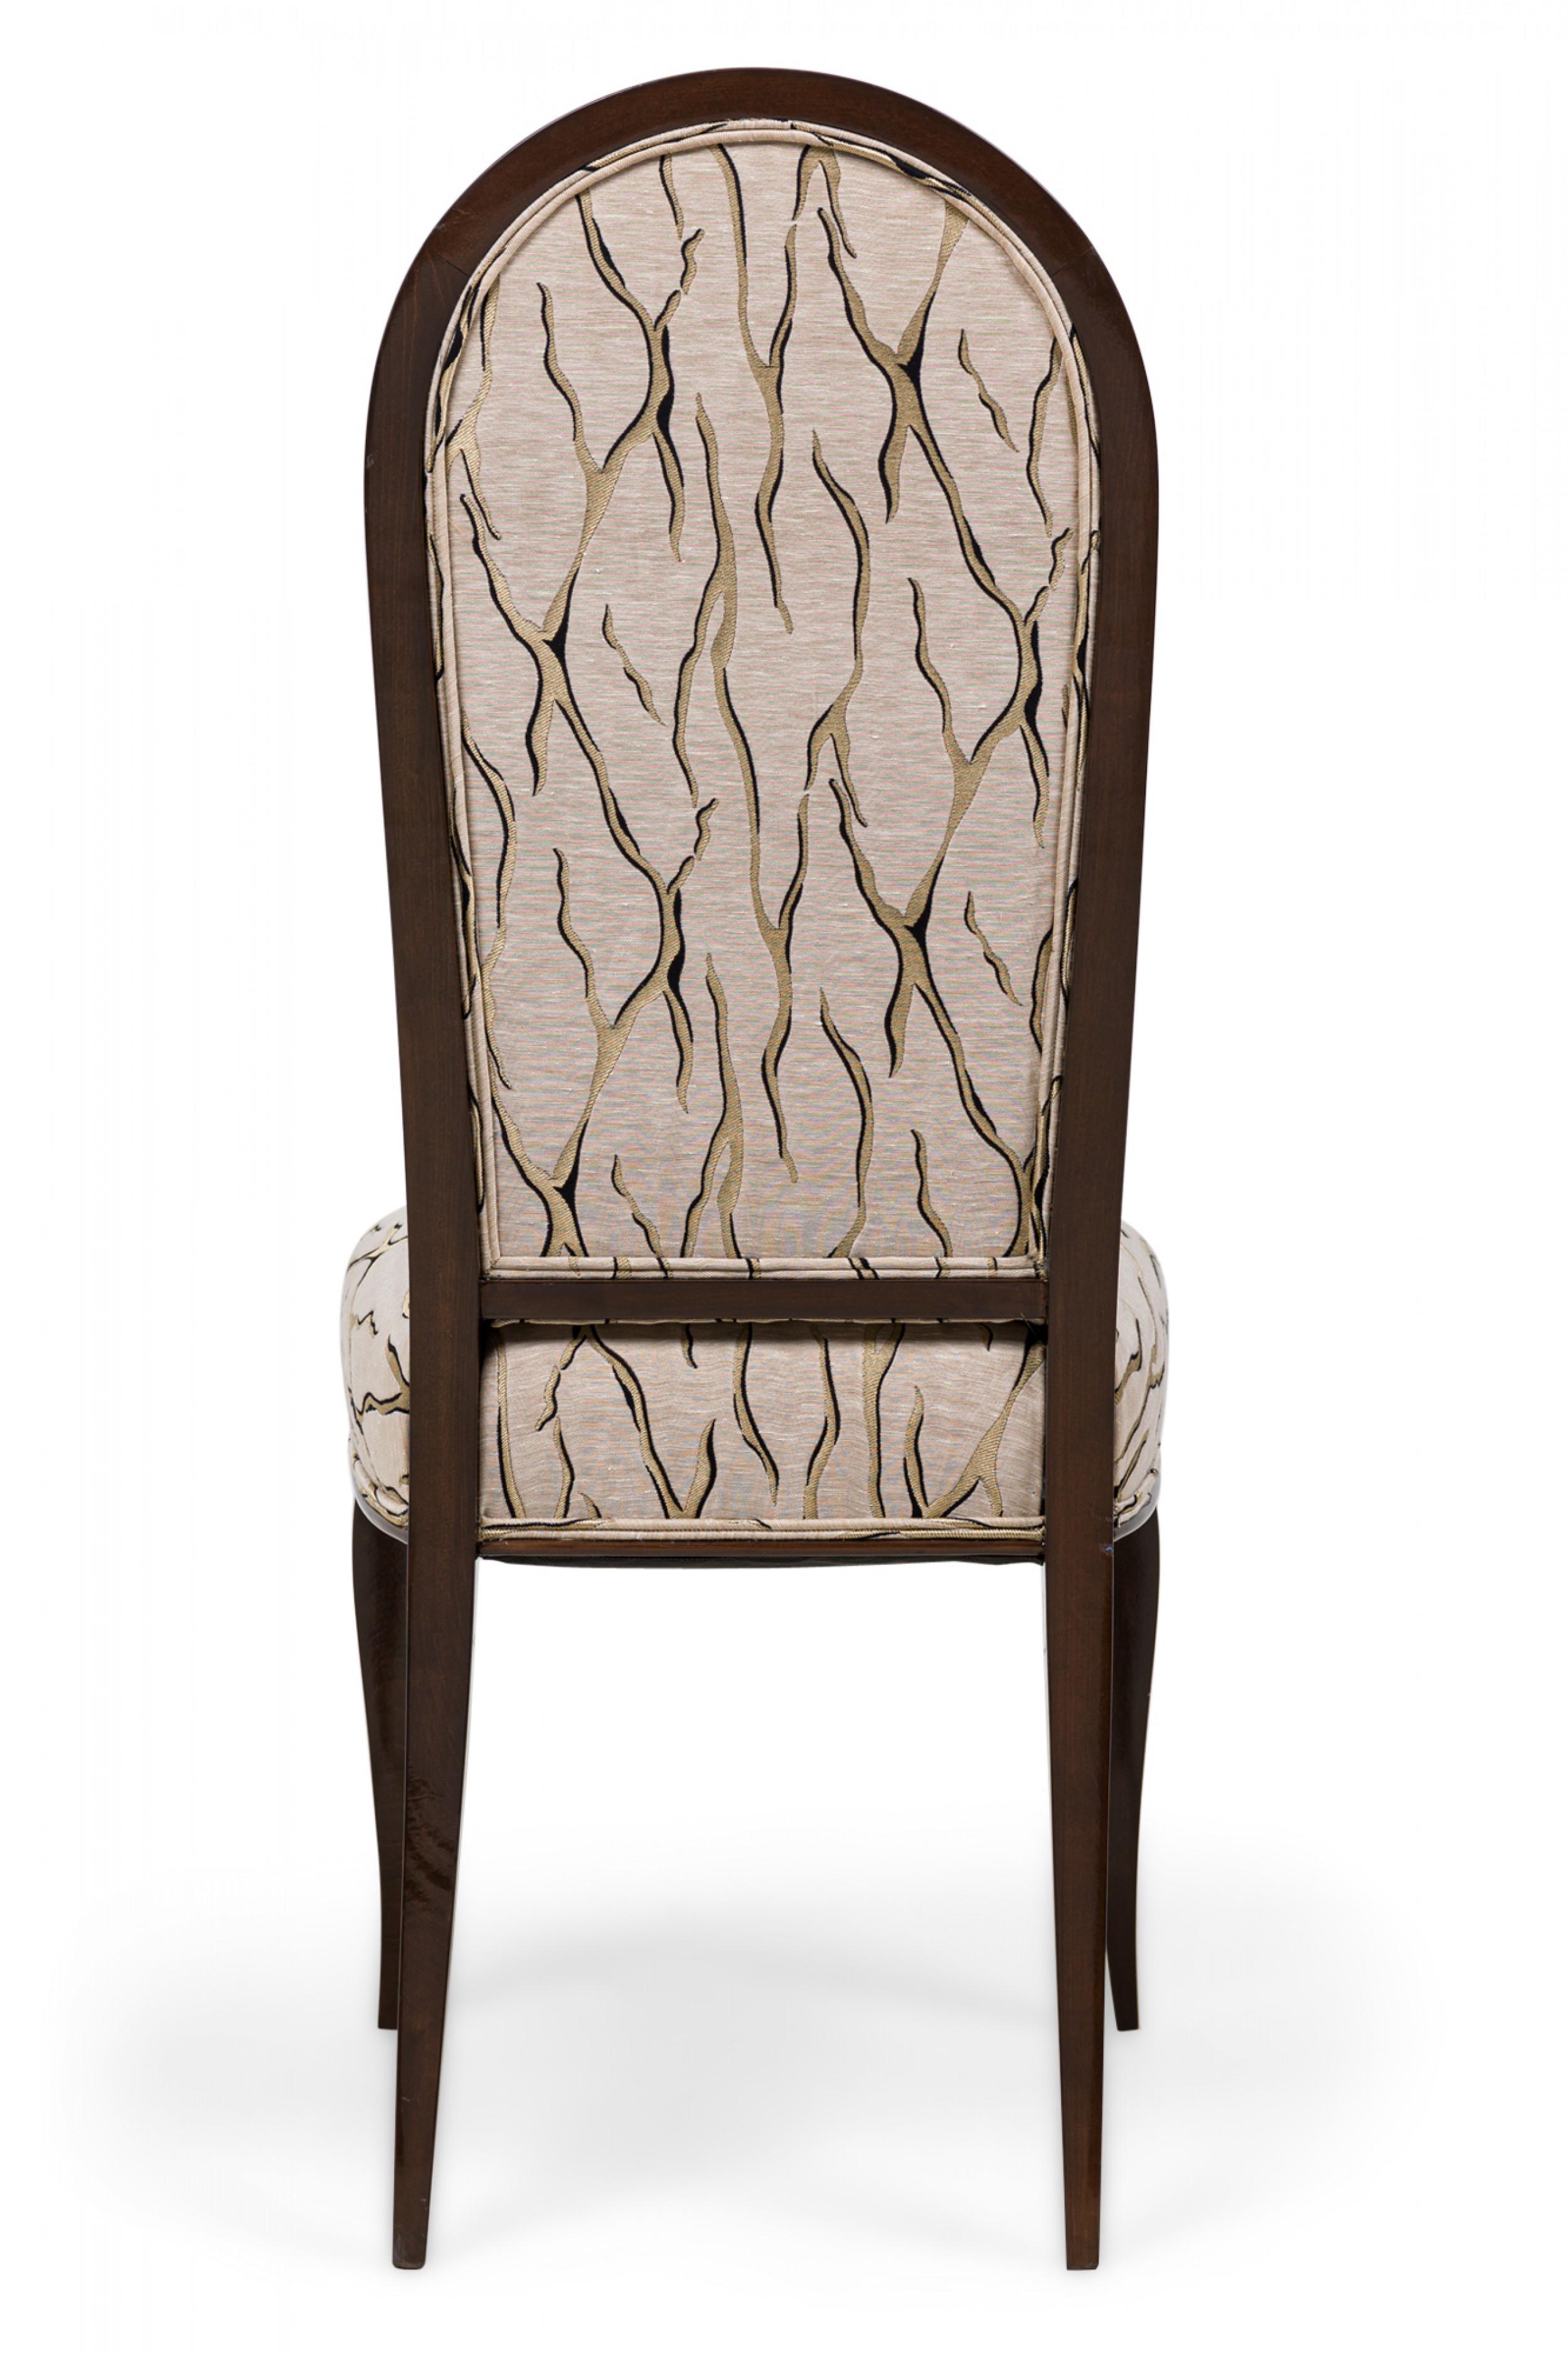 Dominique et Cie French Art Deco Mahogany Beige & Gold Upholstered Dining Chairs For Sale 1